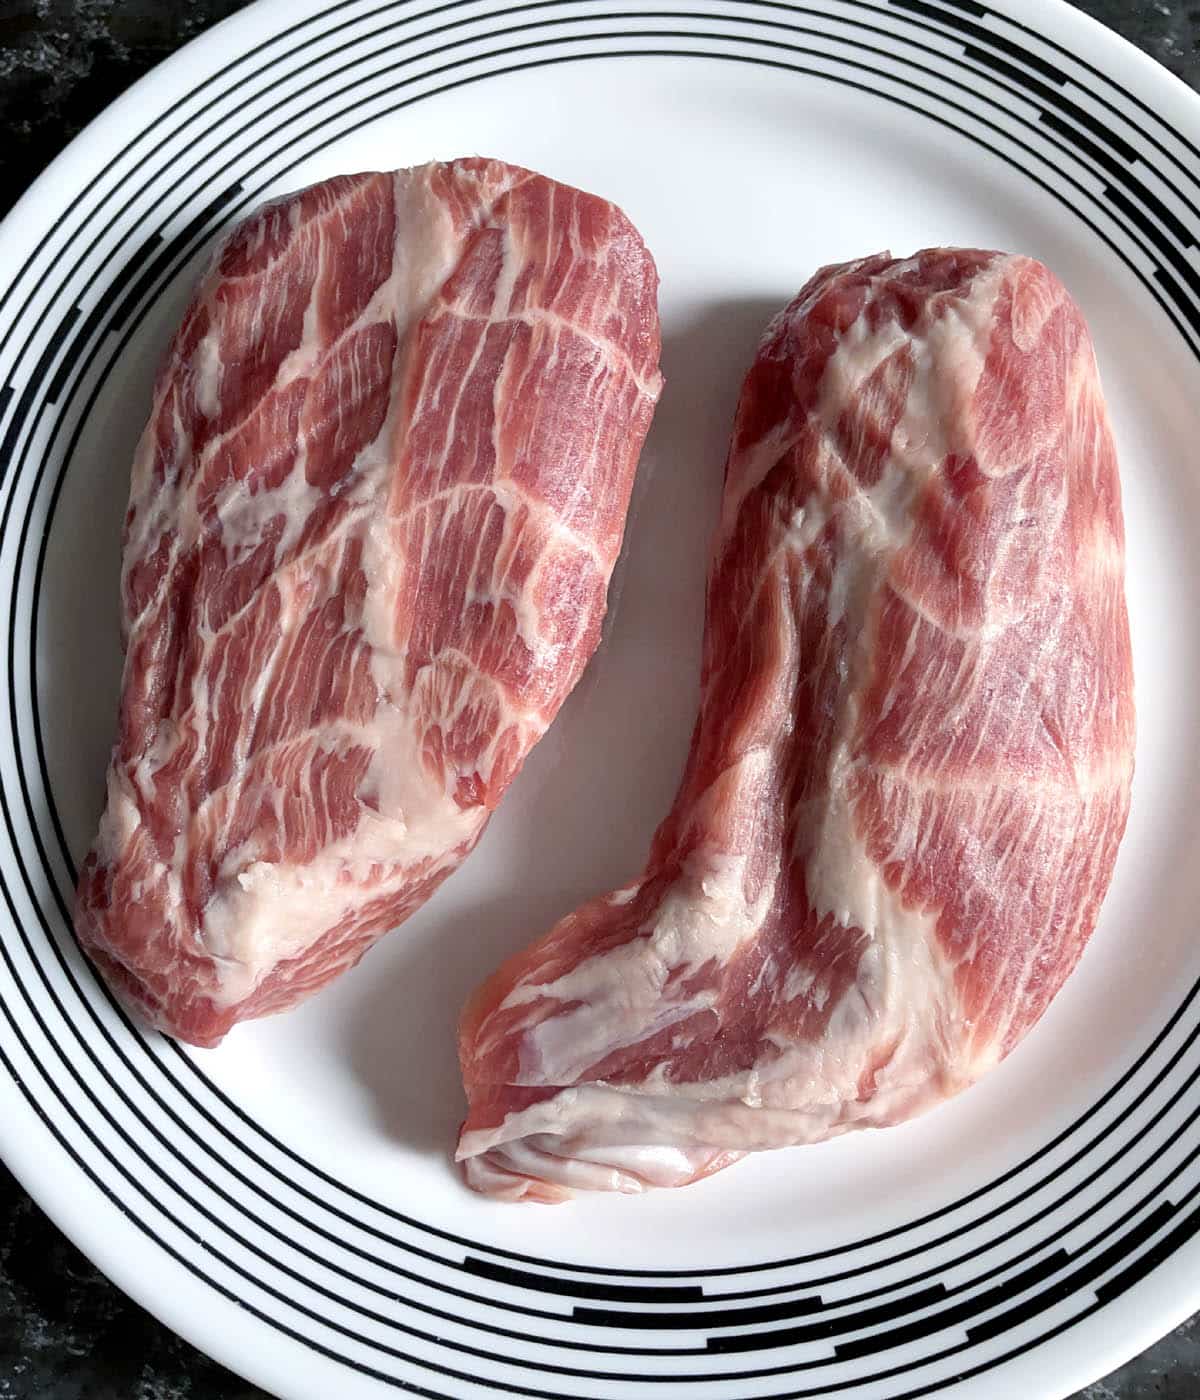 Two raw pieces of pork on a round white plate.